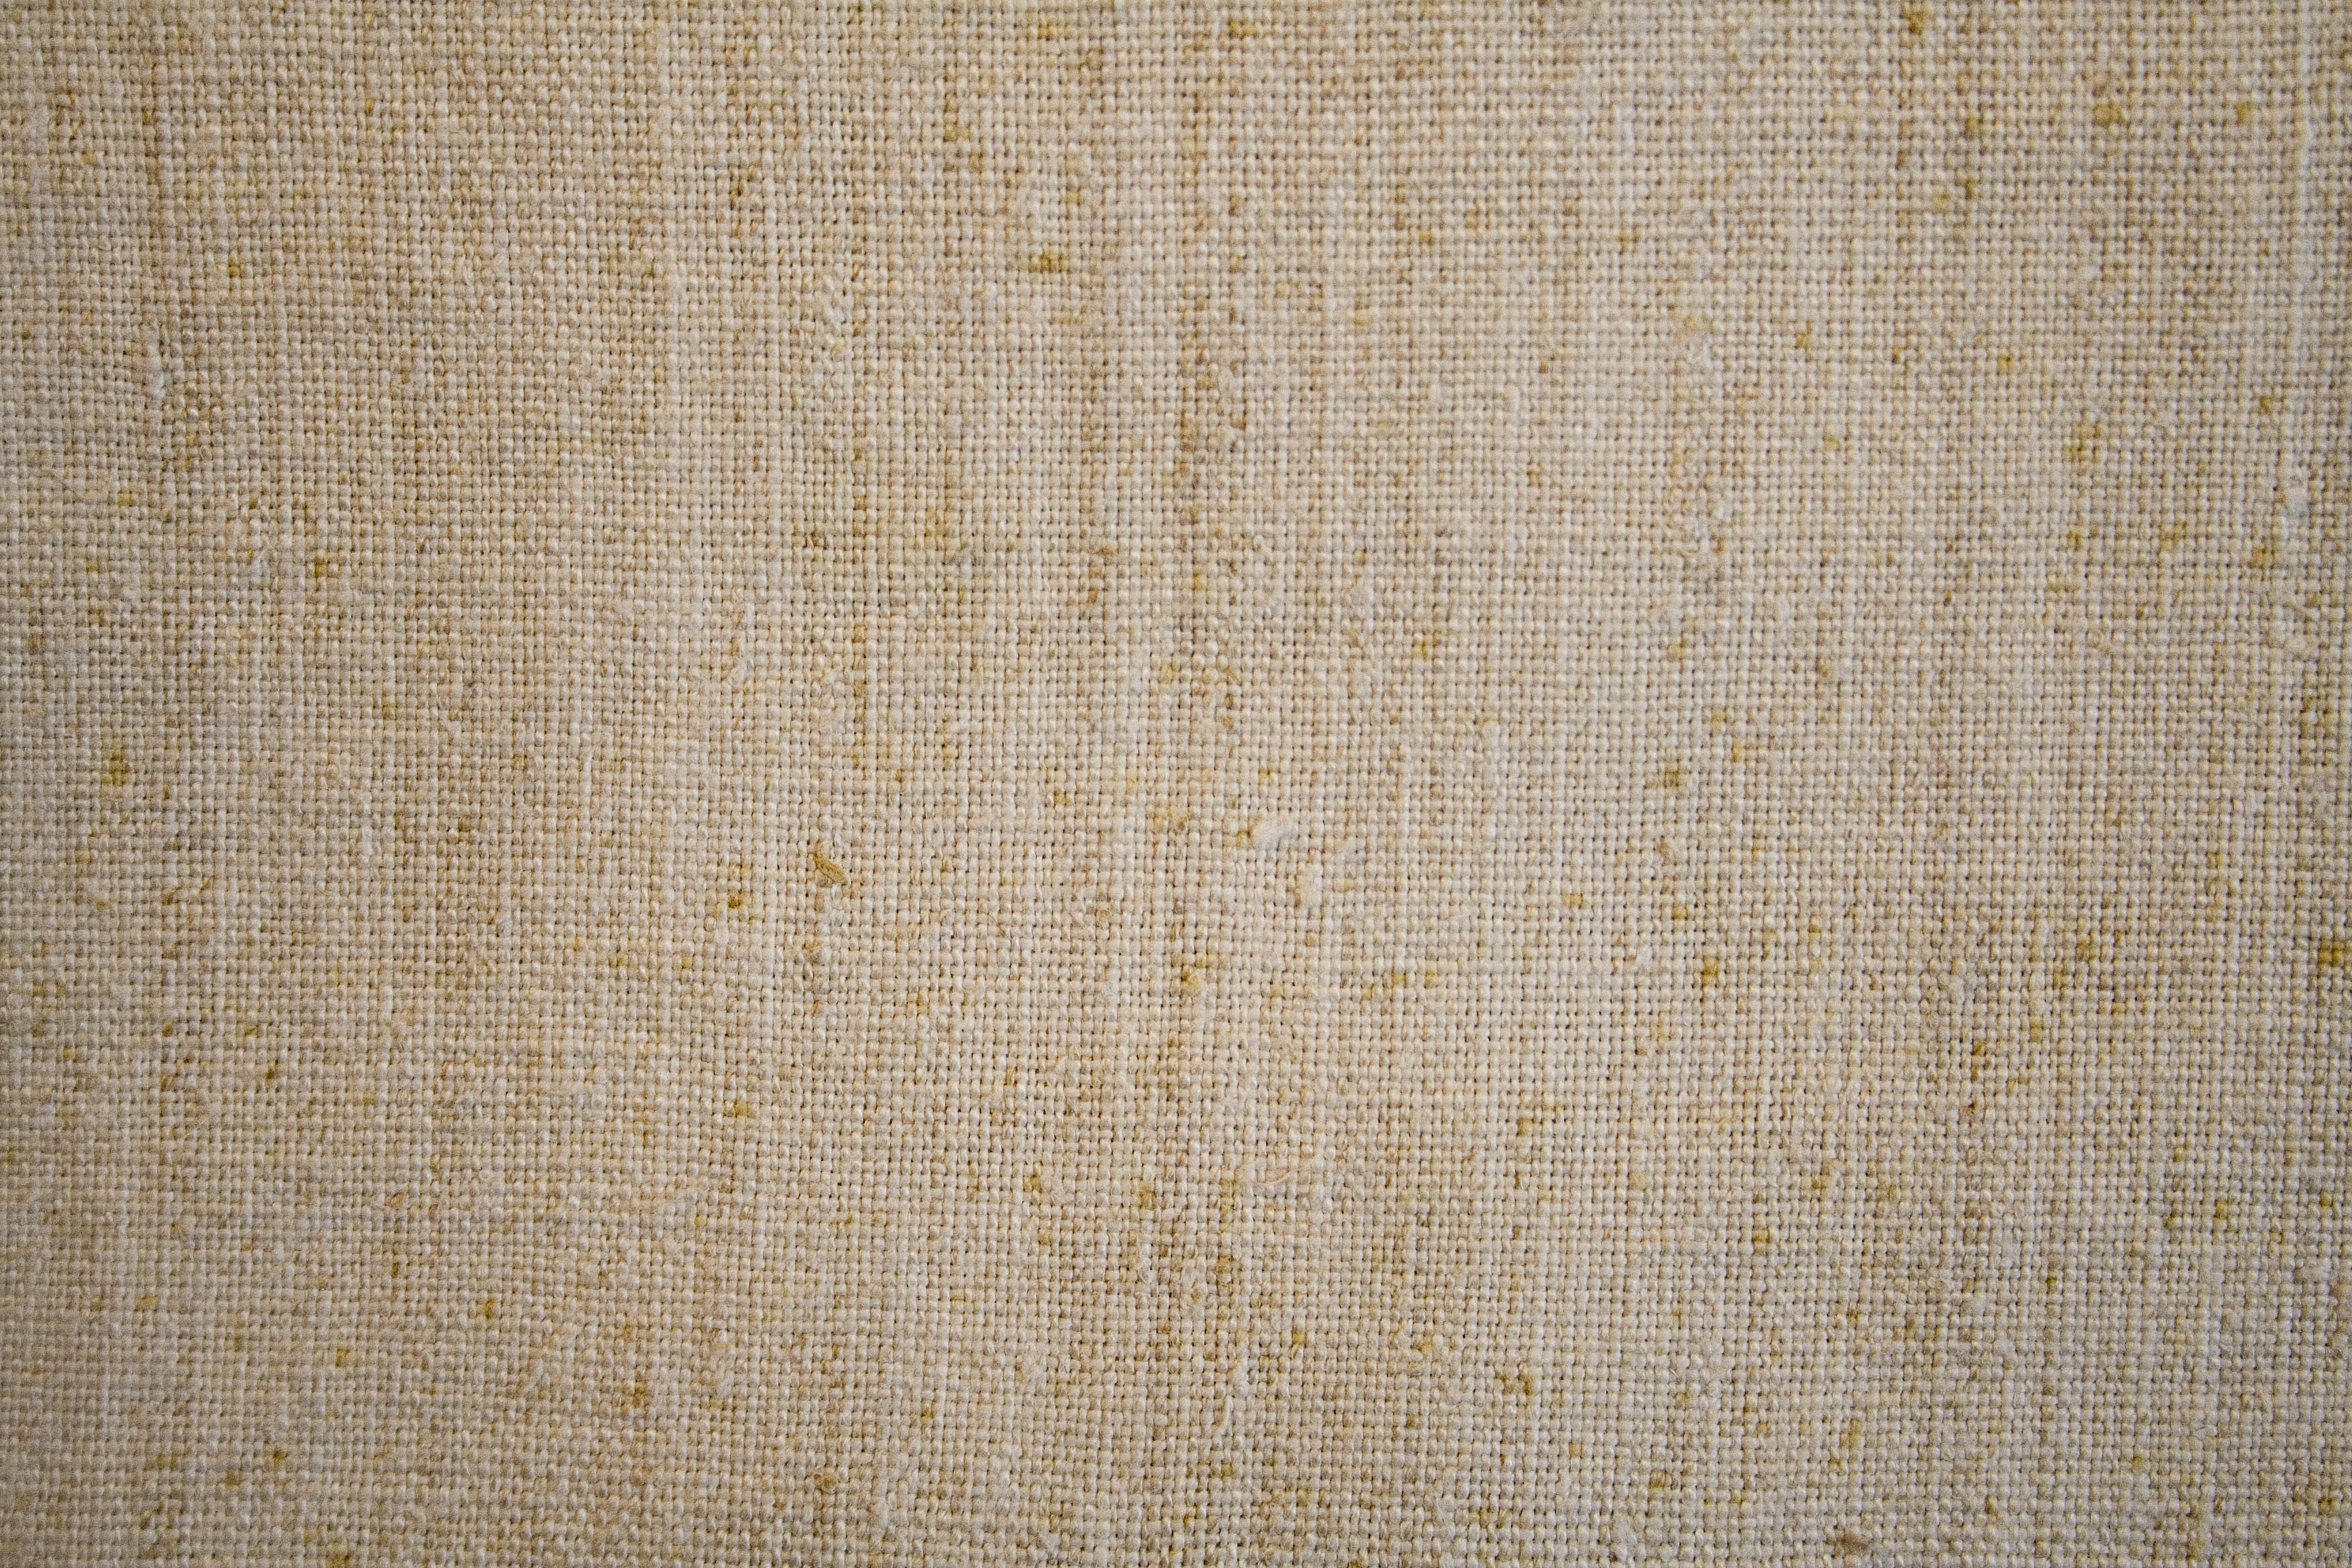 Linen Texture Free All Download Cuzimage